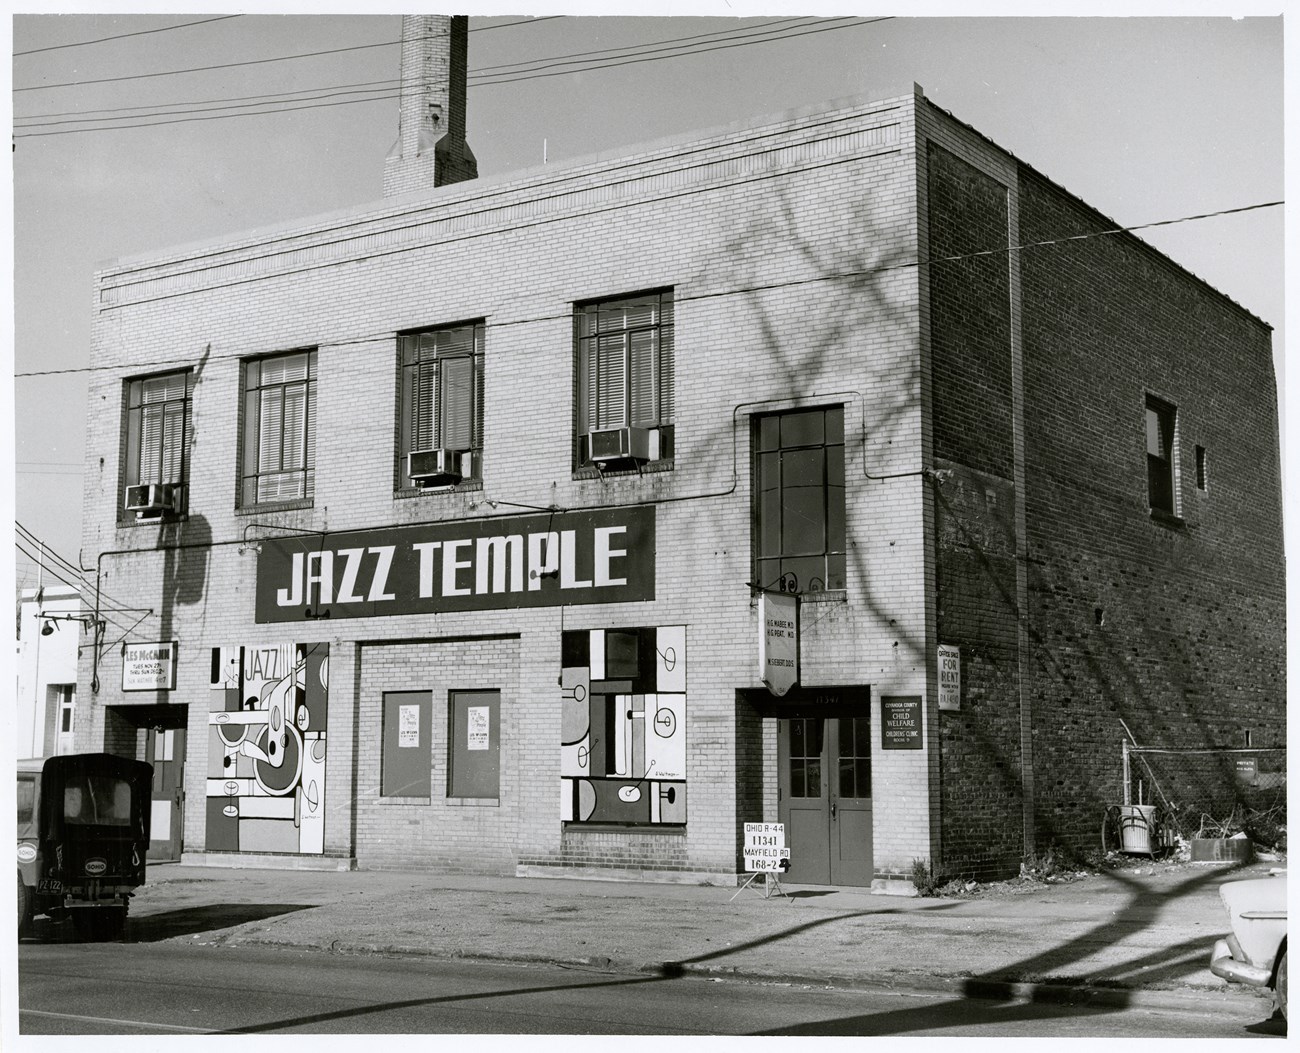 Street view of the "Jazz Temple,” a brick cube-shaped building with abstract murals on the front.